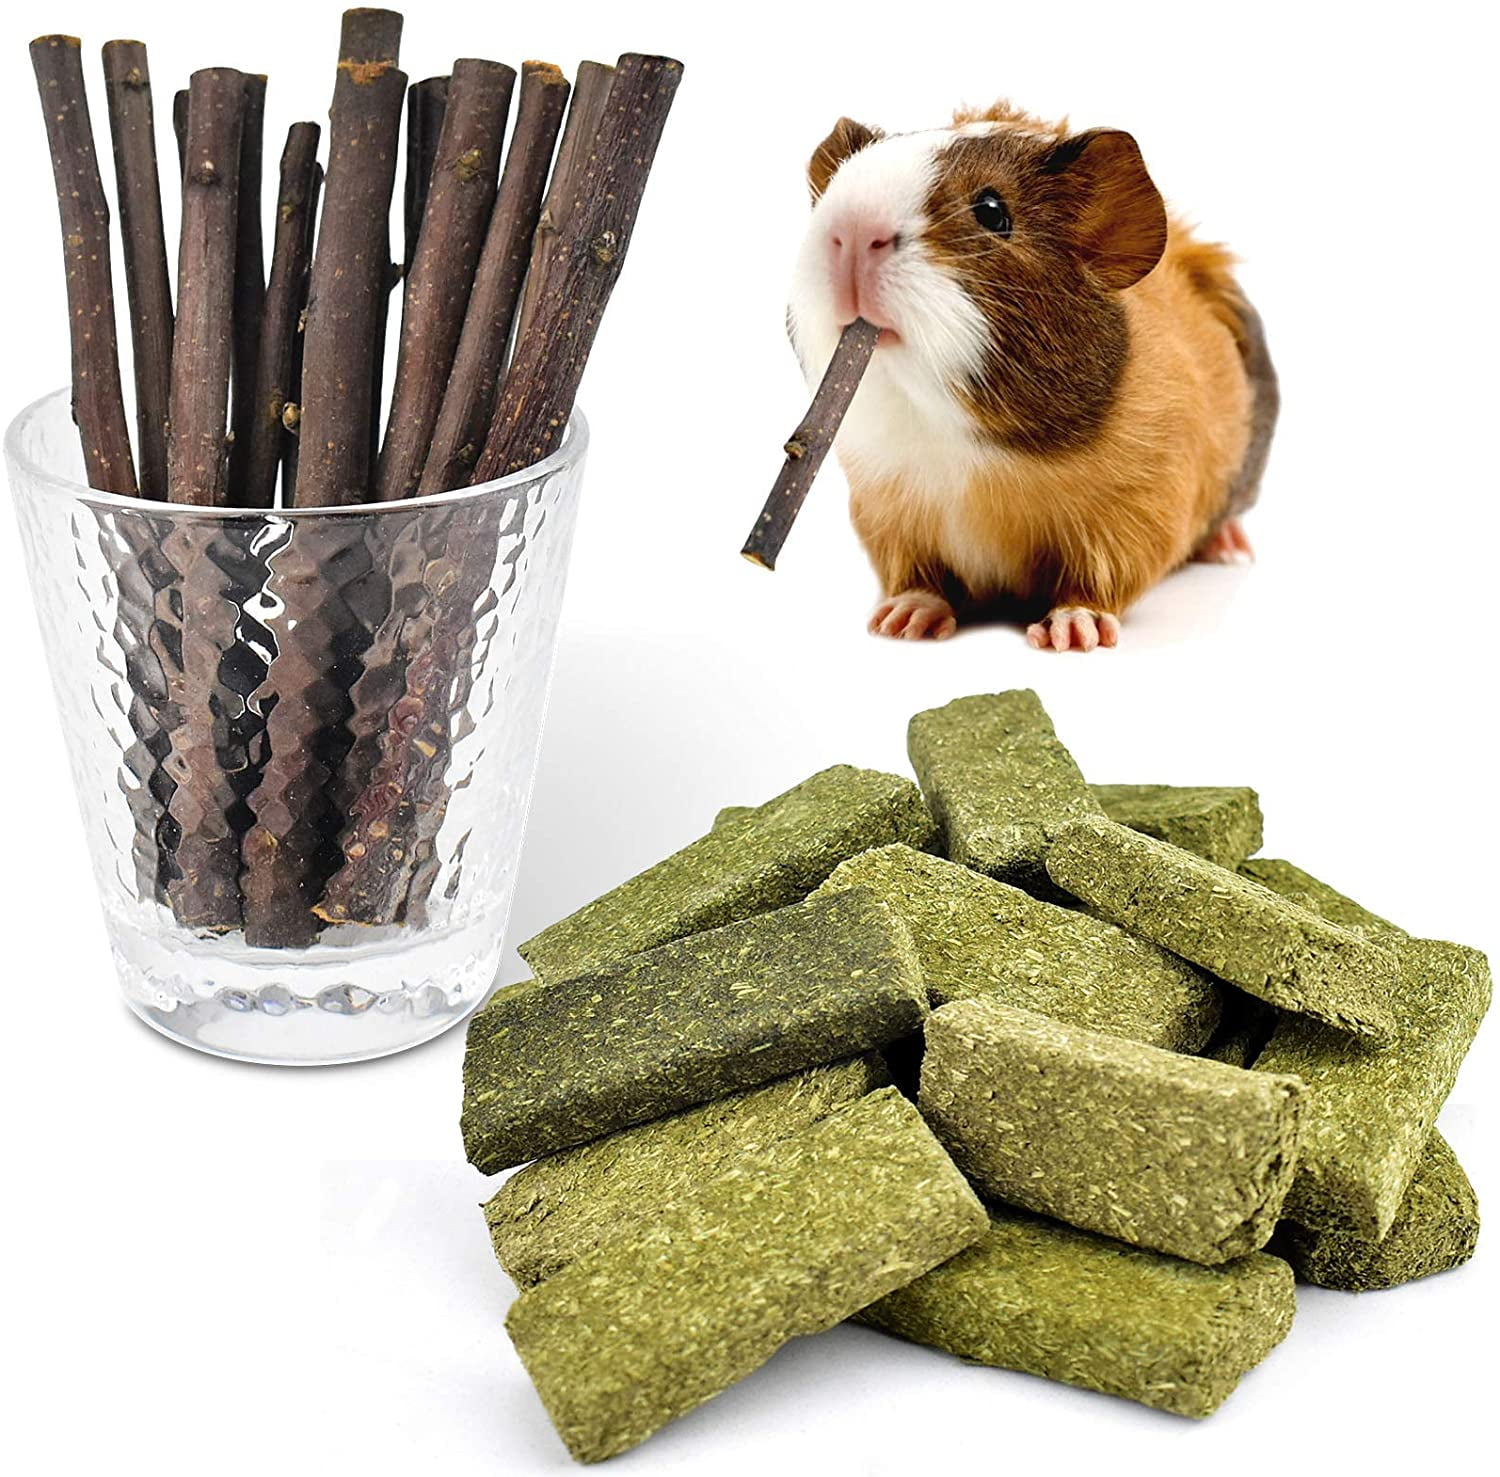 Small Animal Treats Natural Timothy Grass Chew Toys Grass Cake&Grass Ball Pet Snacks Molar Teeth Grinding Toy Chewing for Chinchillas Hamsters Guinea Pig Dwarf Rabbit Gerbils Rabbit Chew Toys 